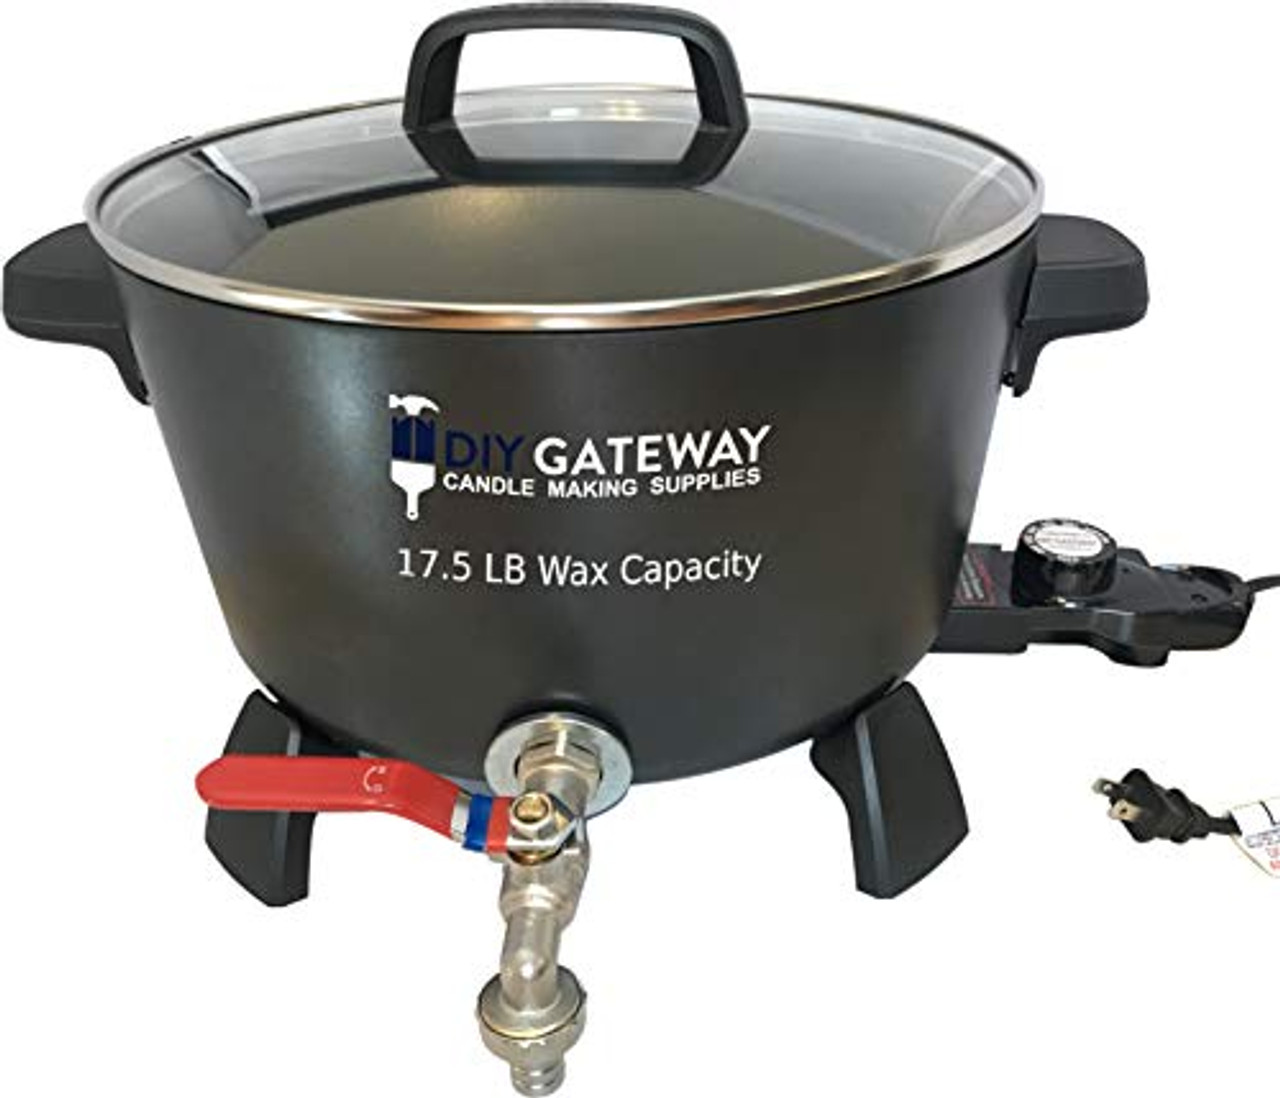 Wax Melter for Candle Making: Extra Large 17.5 LB Wax Capacity